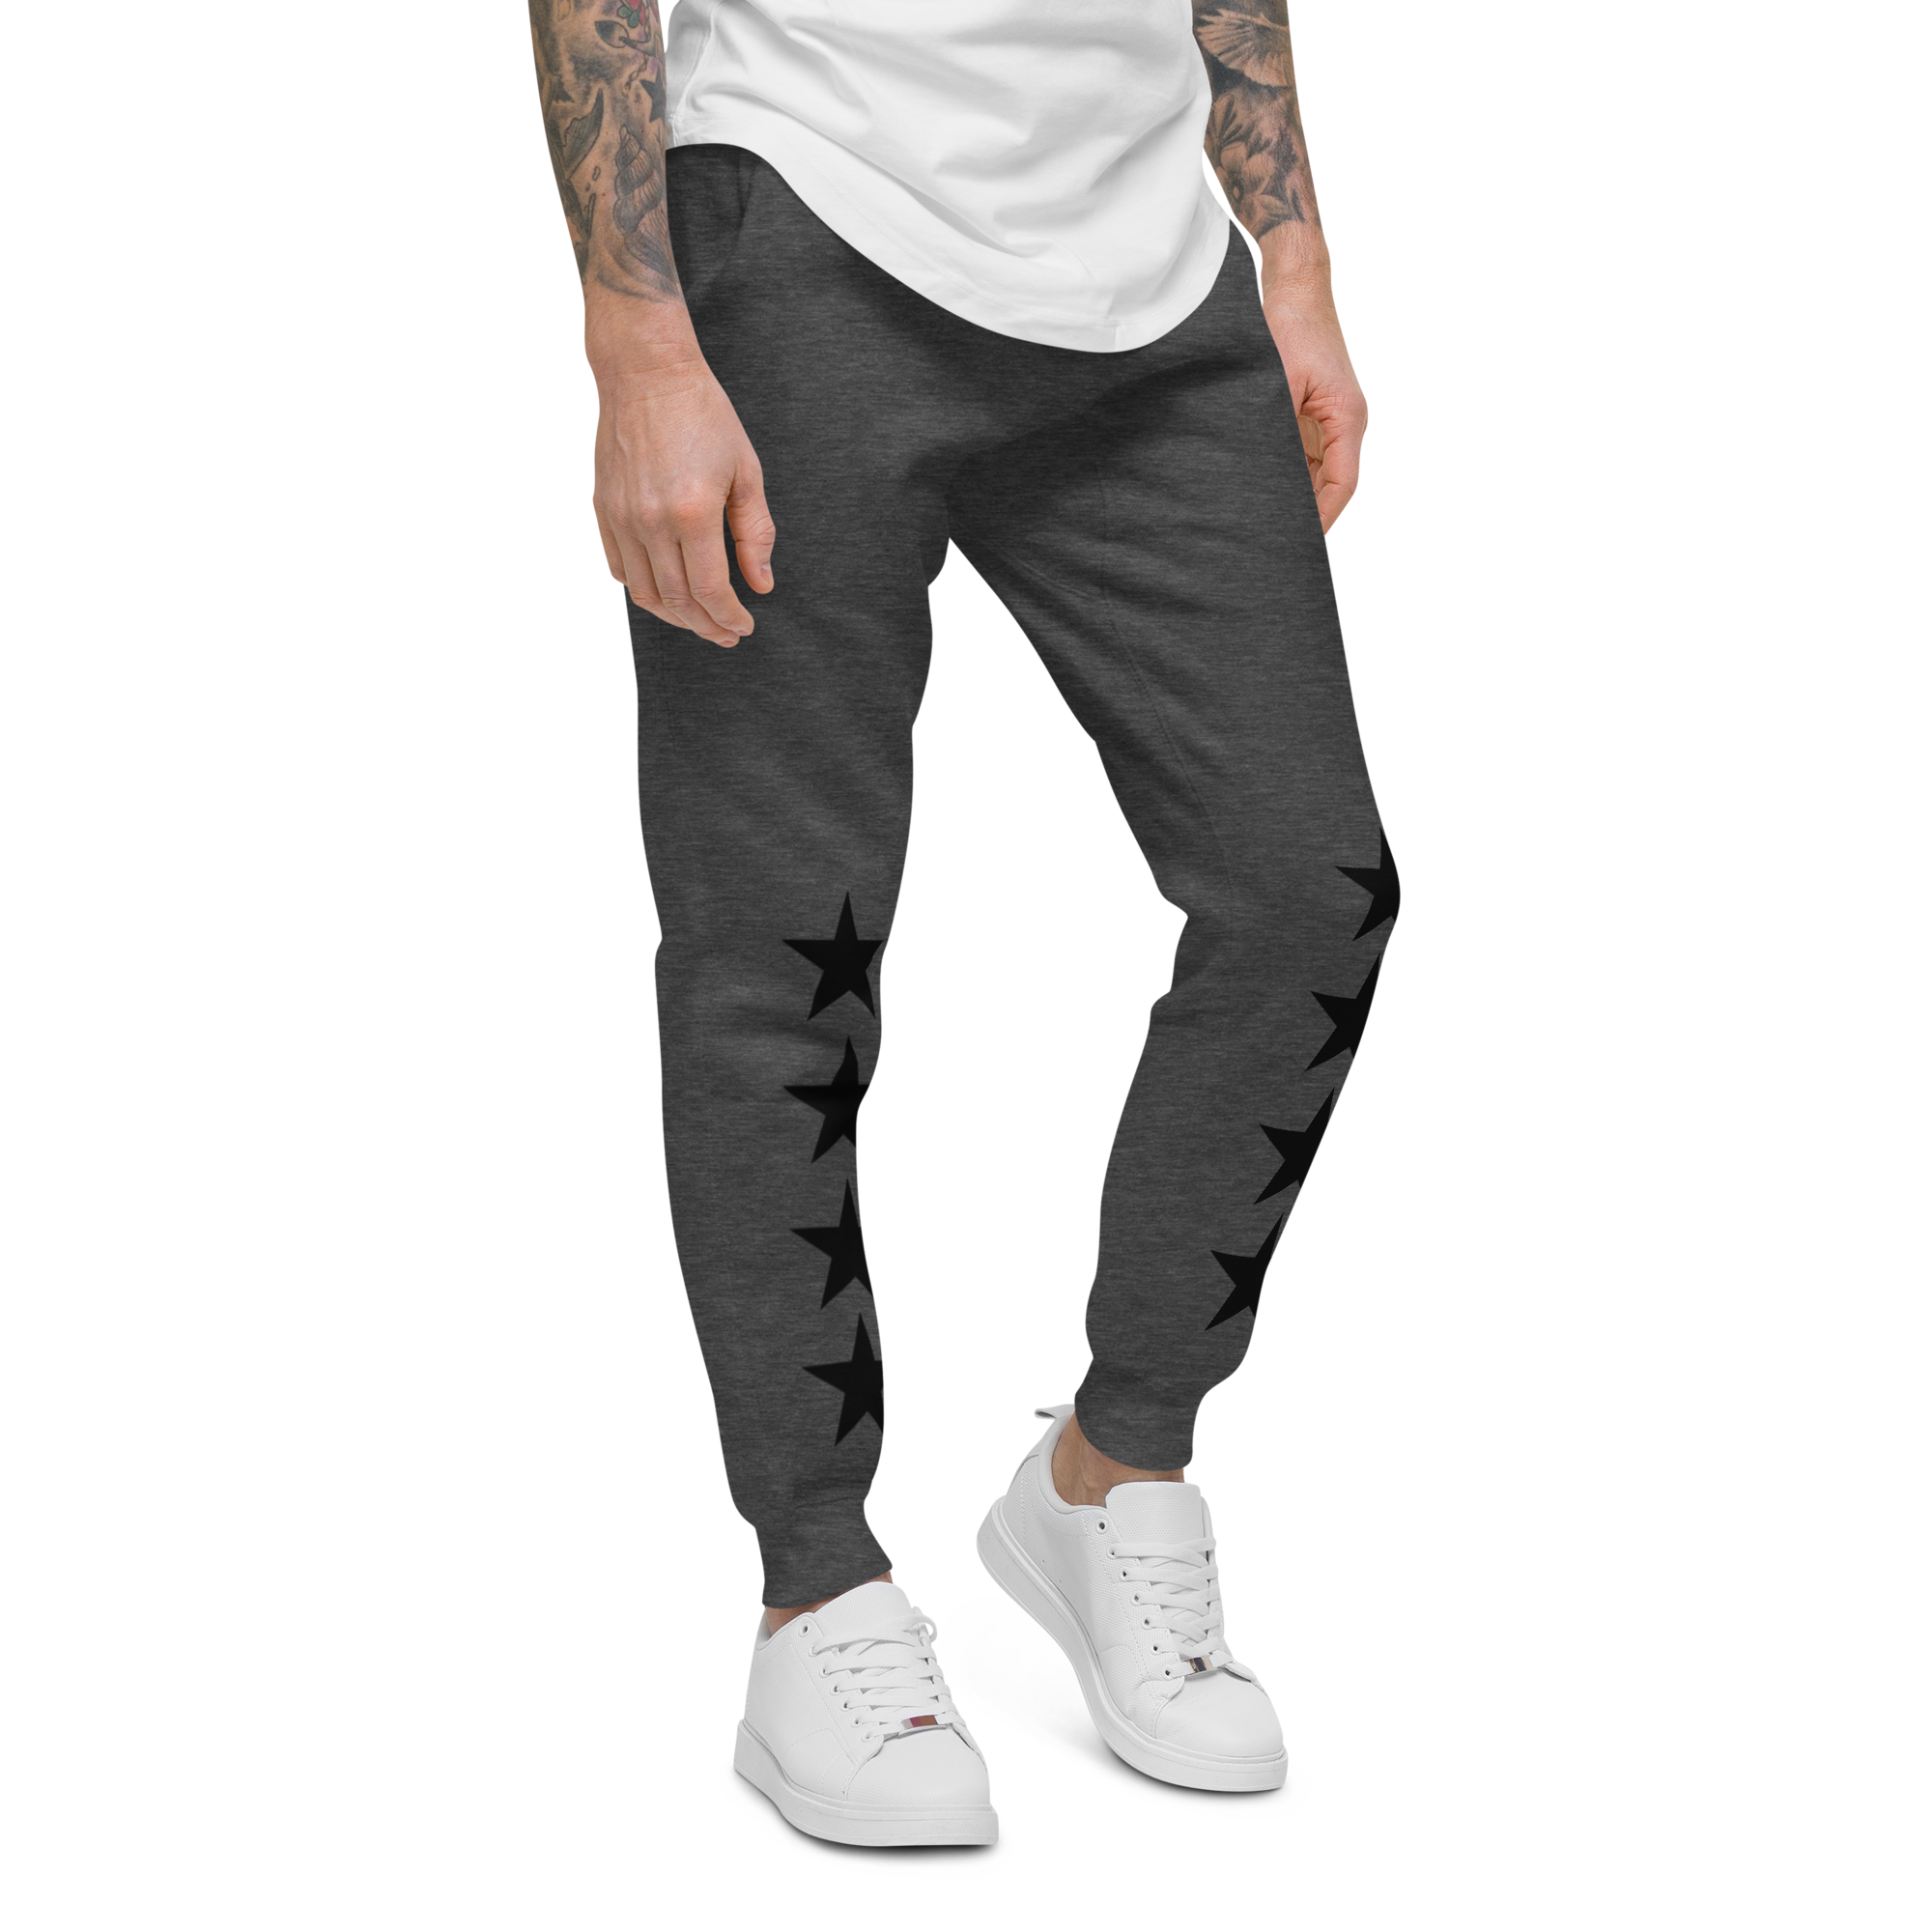 Riches Couture Mens Sweatpants dark heather grey